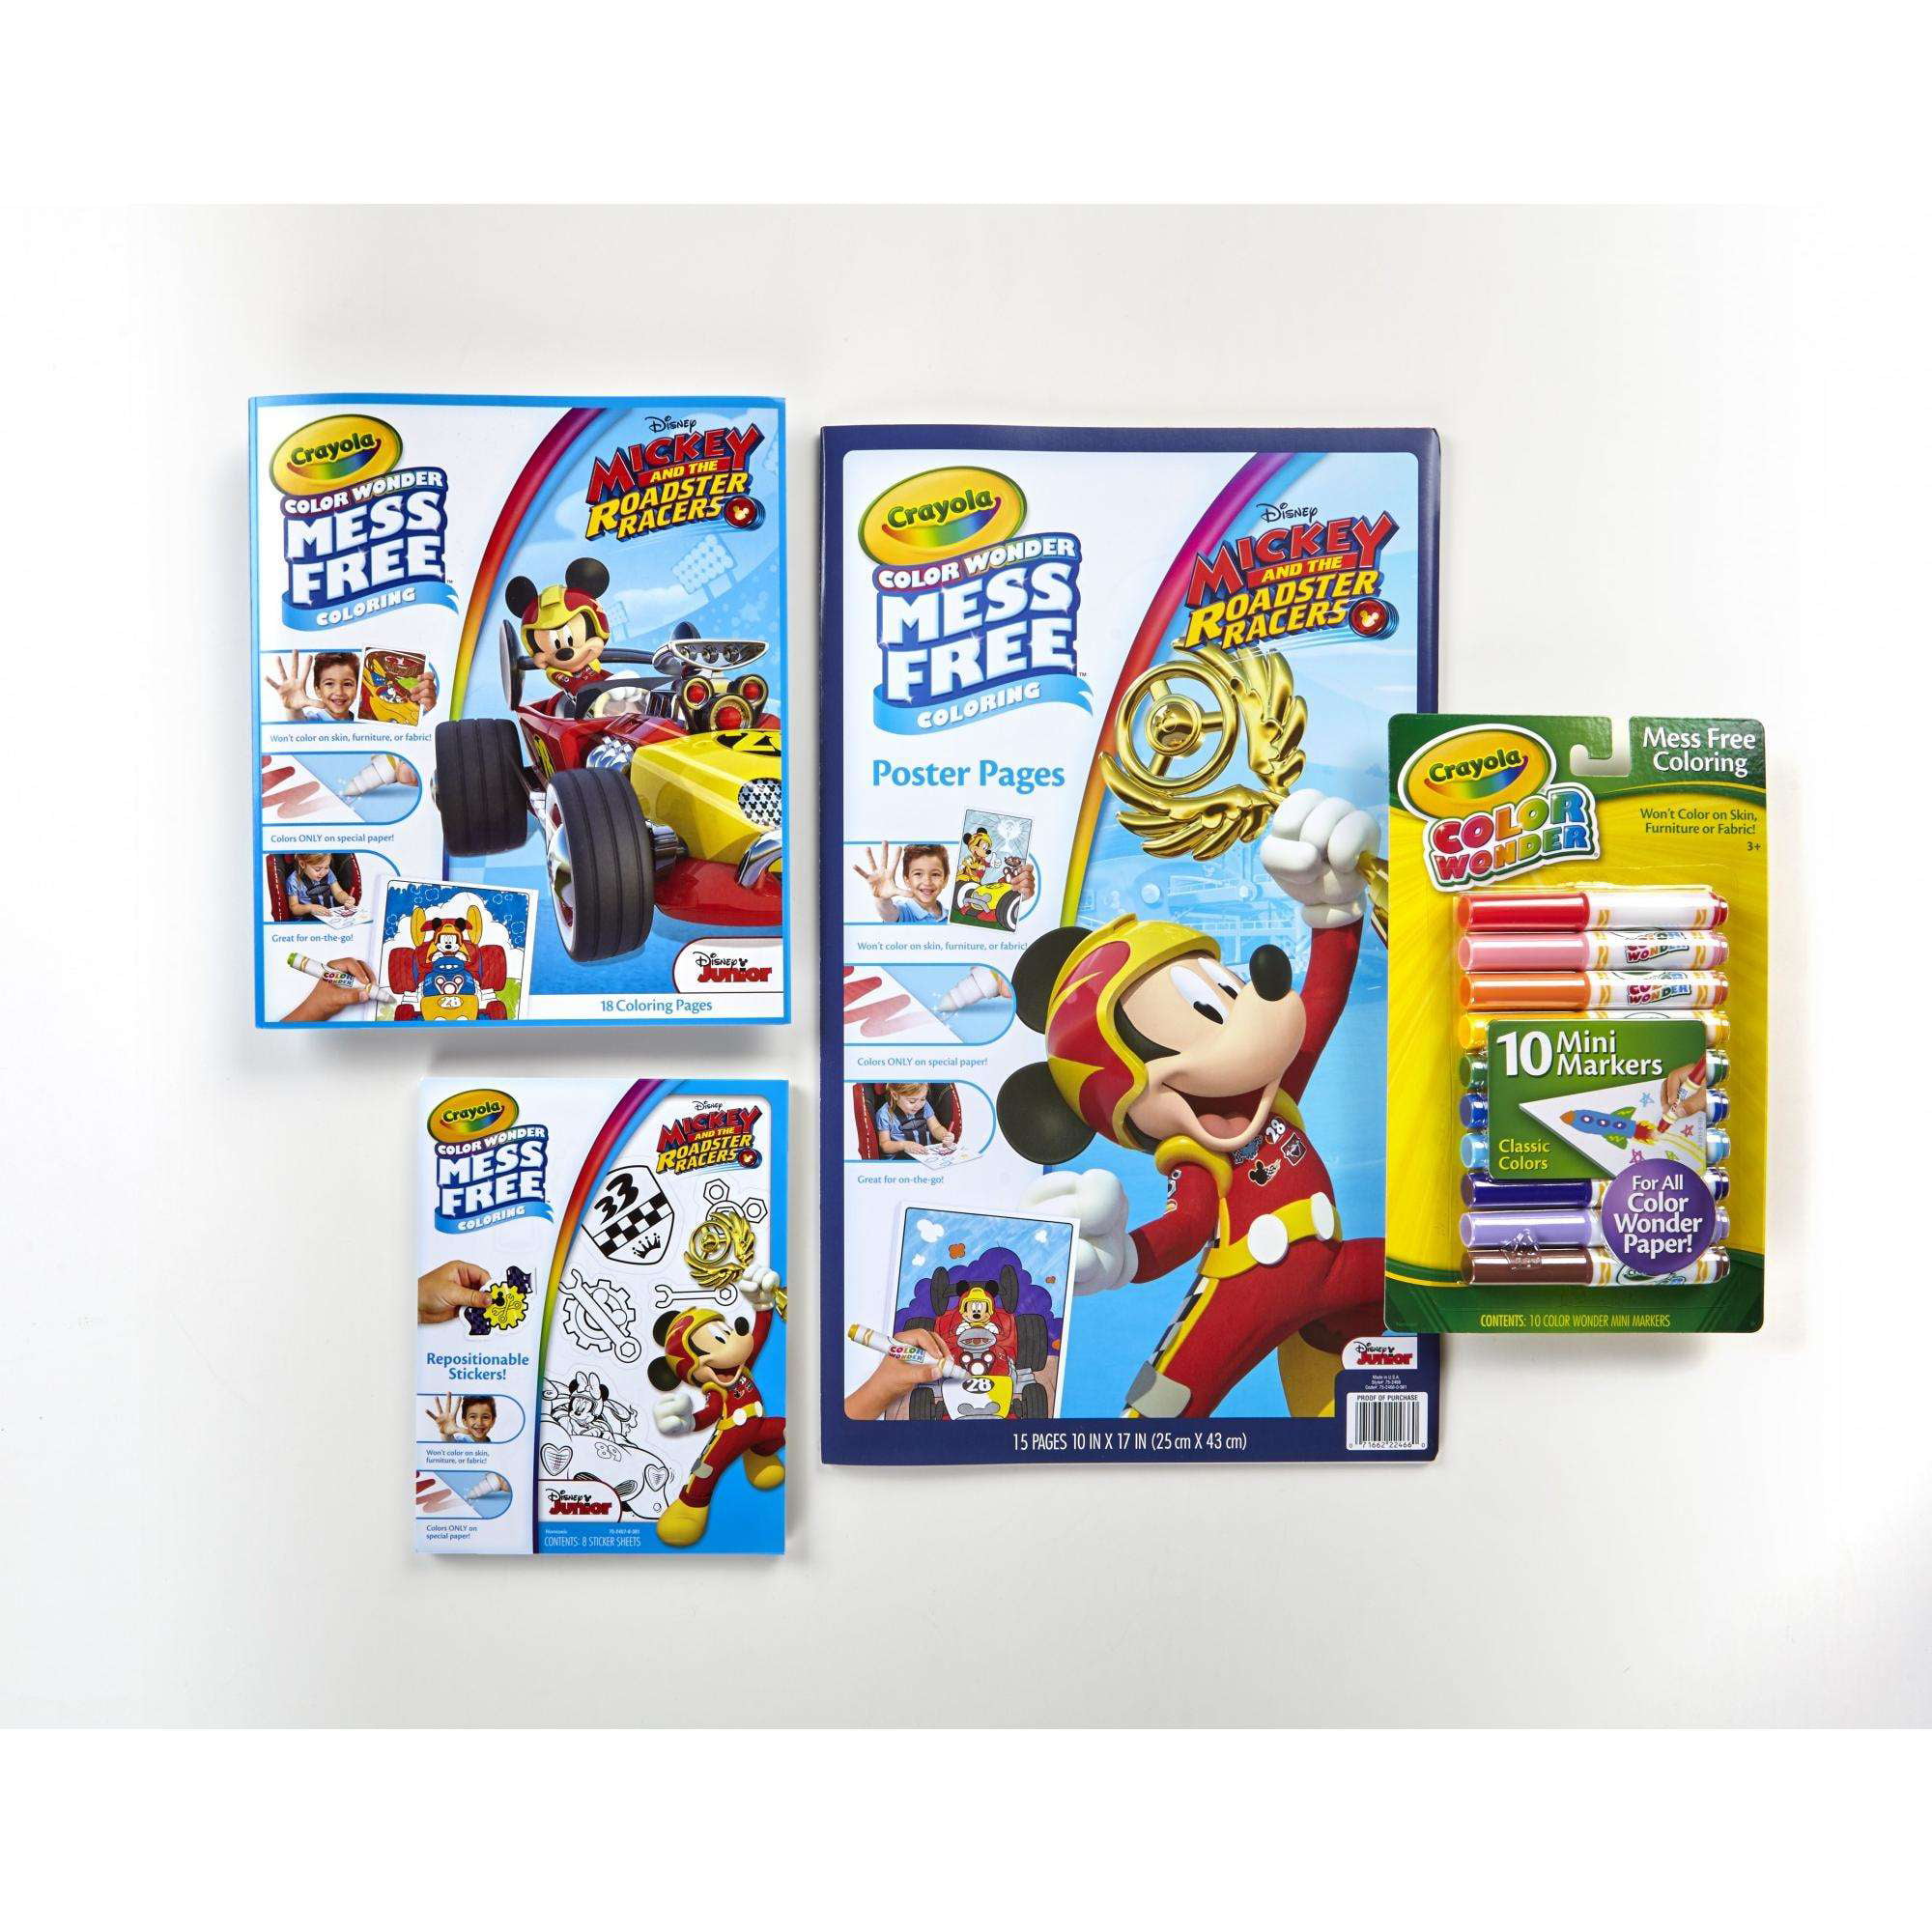 Crayola Mess Free Mickey Mouse Roadster Racers Color Wonder Pad 18 Mickey  Mouse Clubhouse Coloring Pages, 5 Color Wonder Markers - Drawing Toys -  AliExpress